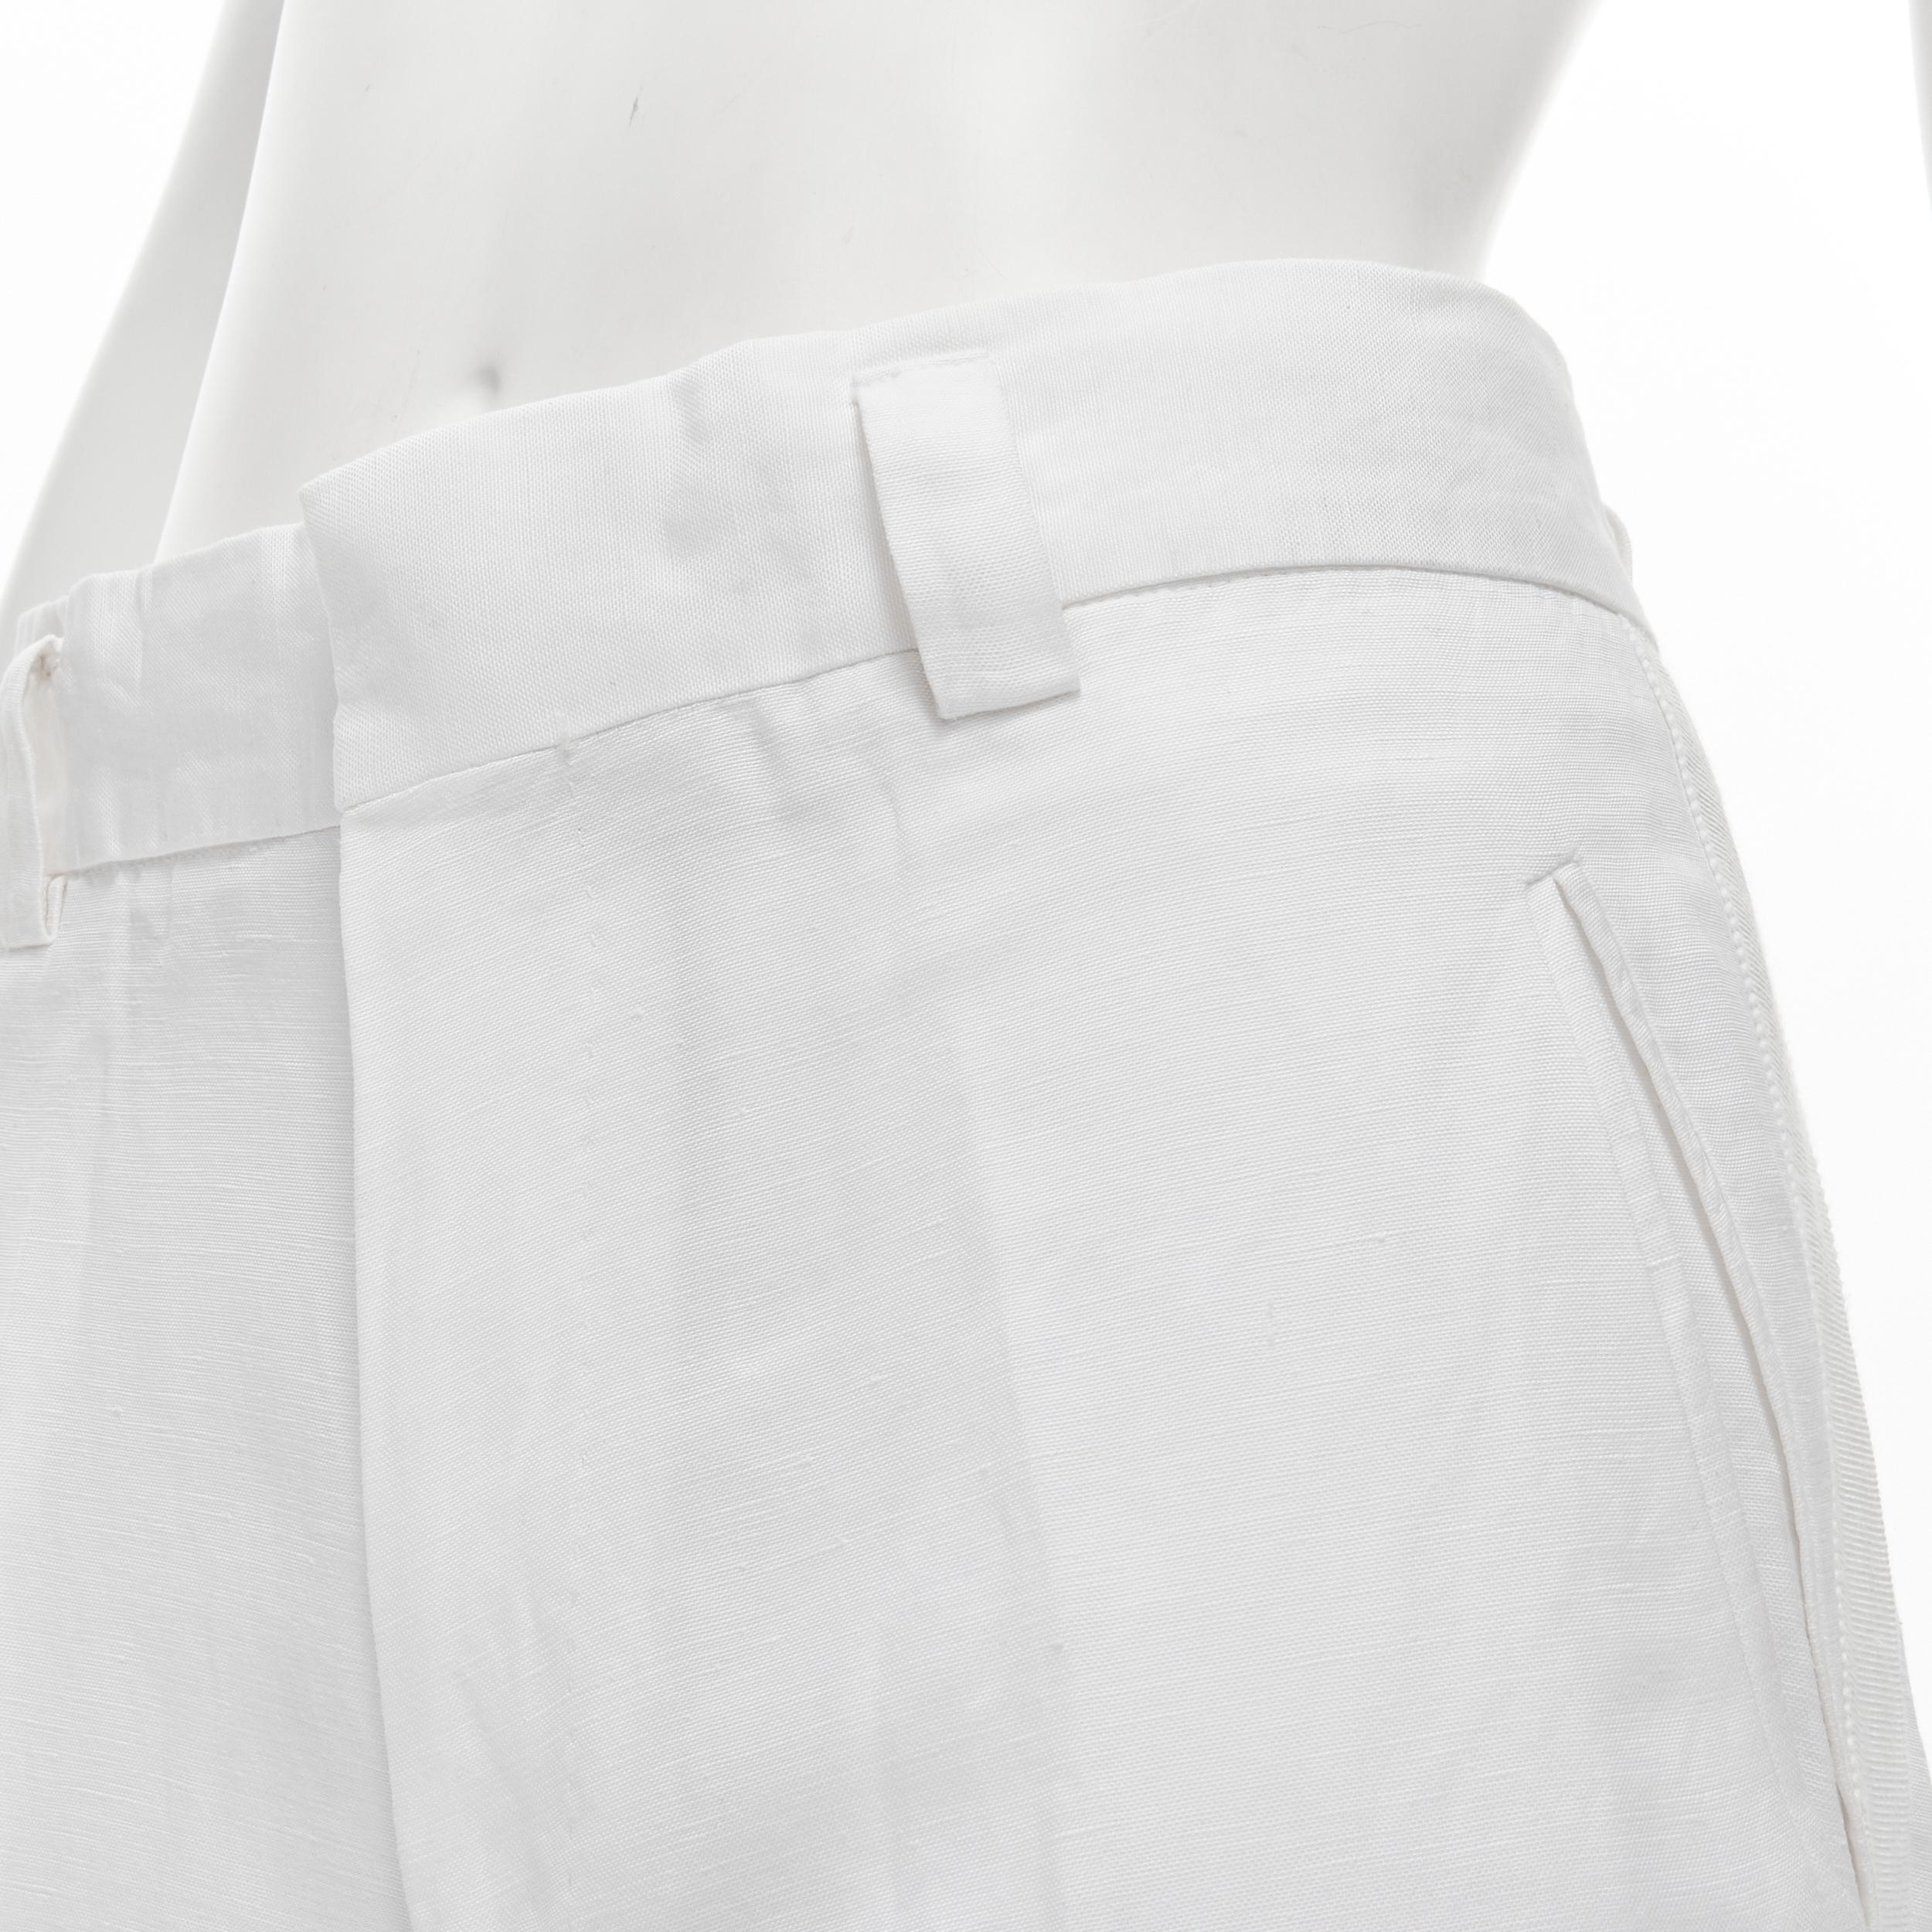 HAIDER ACKERMANN white grosgrain linen drop crotch cropped trousers FR38 S 
Reference: CNLE/A00129 
Brand: Haider Ackermann 
Designer: Haider Ackermann 
Material: Linen 
Color: White 
Pattern: Solid 
Closure: Zip 
Made in: Romania 

CONDITION: